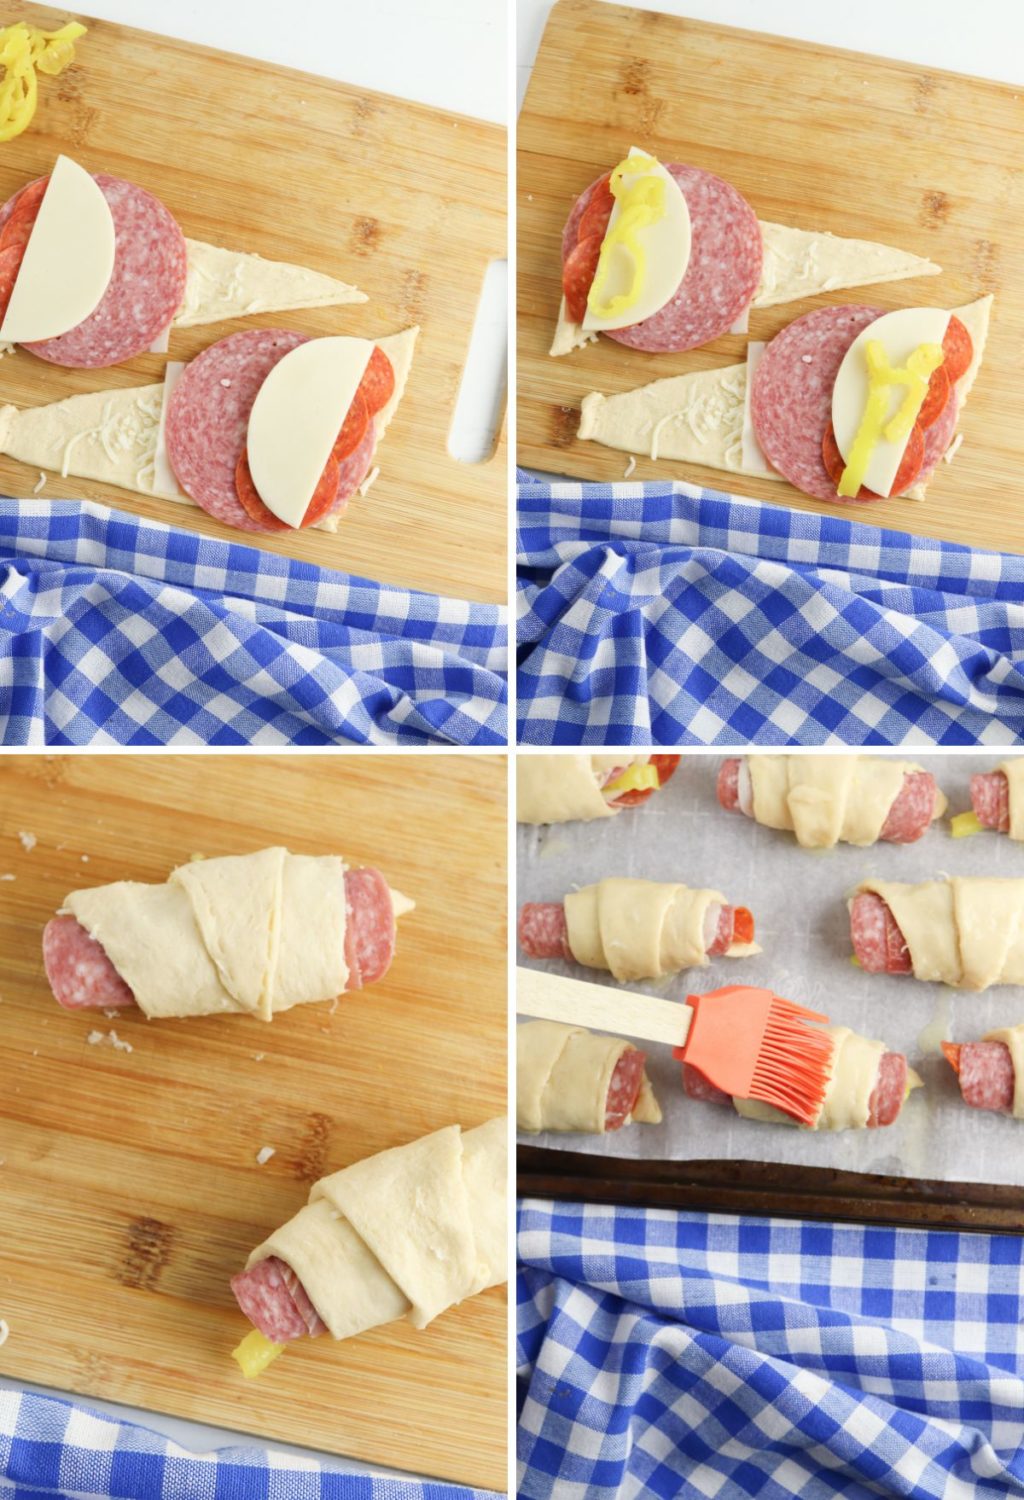 A series of pictures showing how to make a sausage swiss roll.